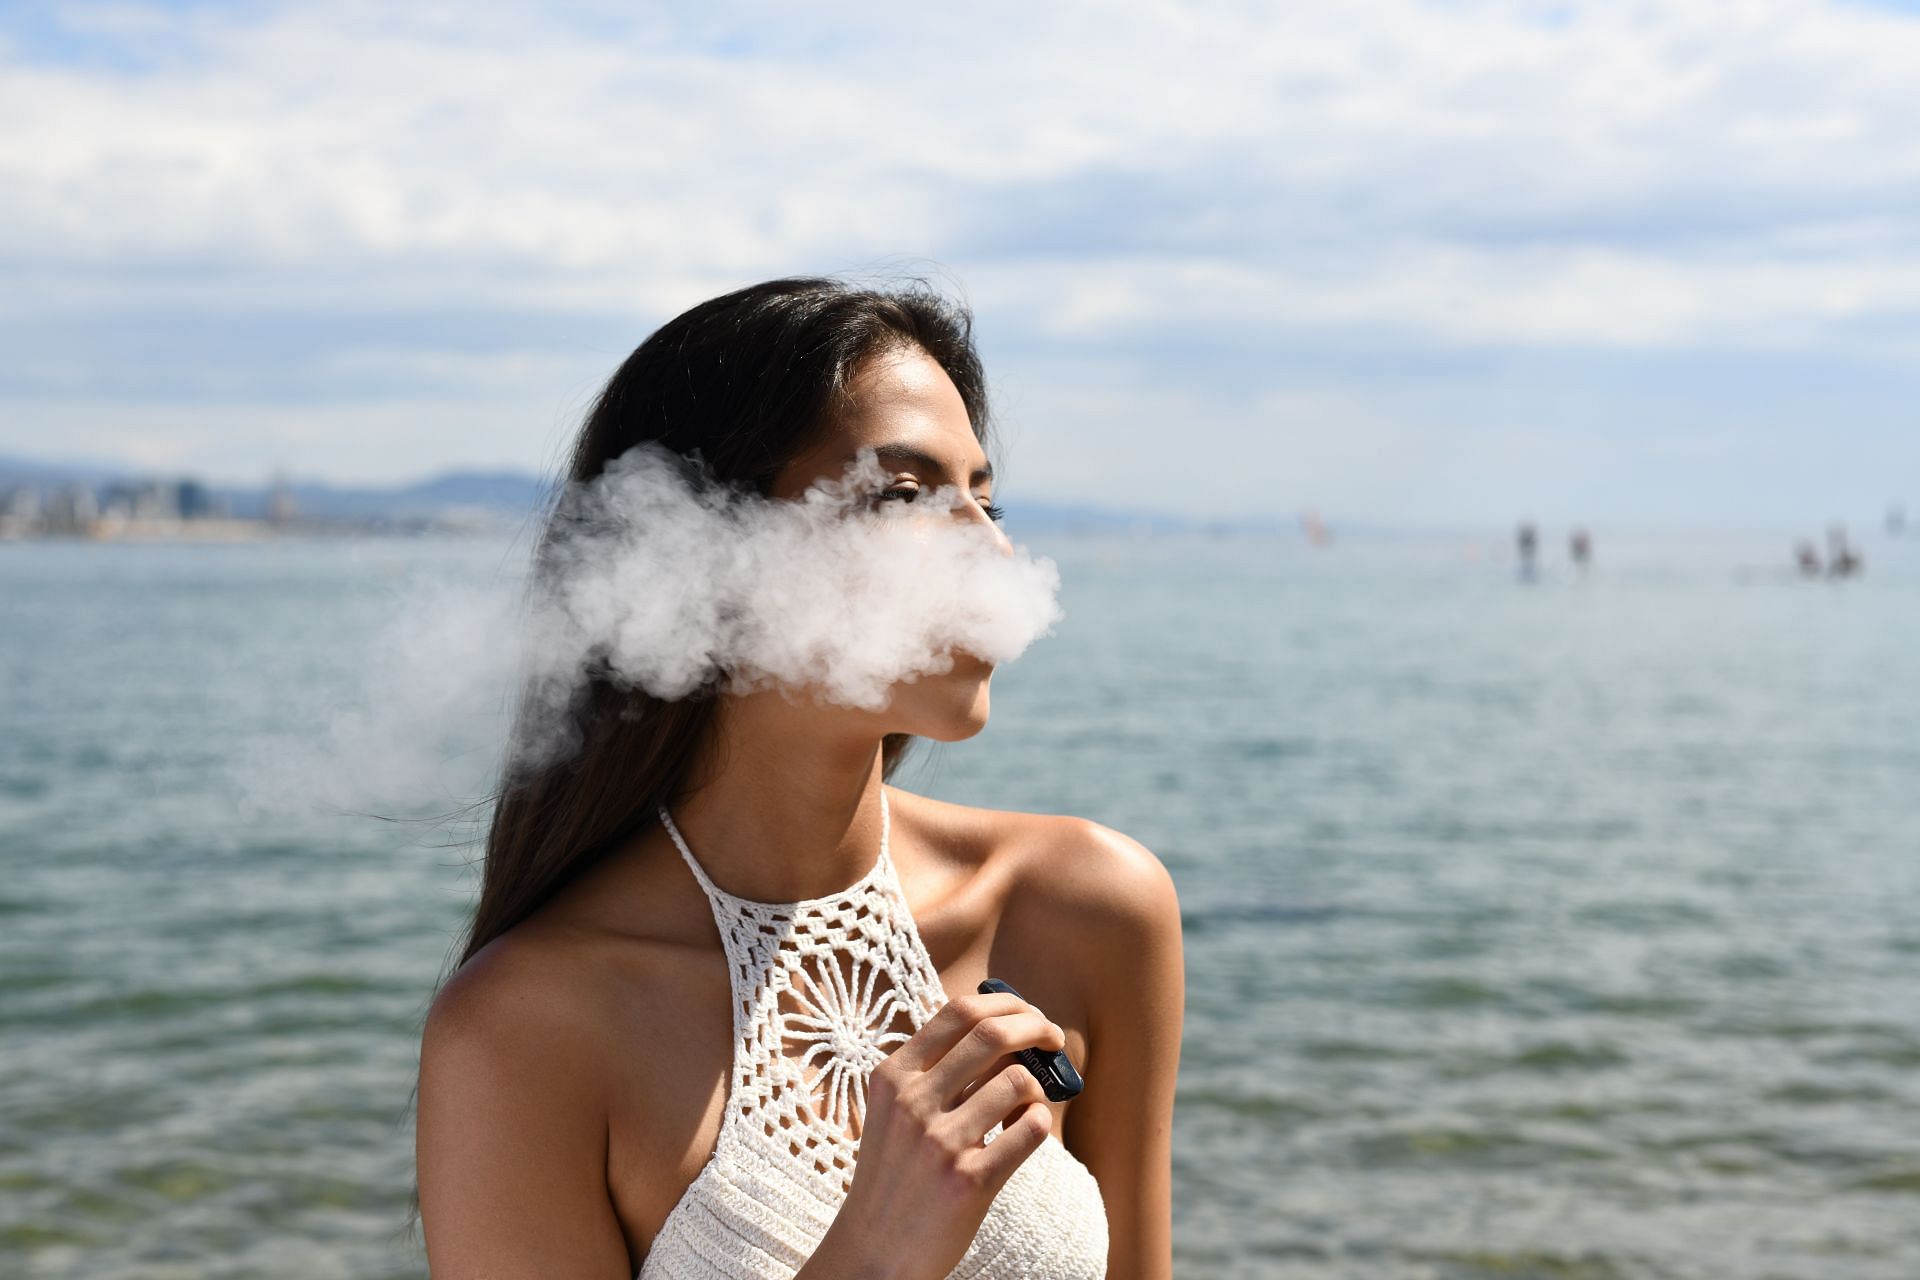 Smoking e-cigarettes increases respiratory risk among teens within 30 days. (Image via Unsplash/ Formm Agency)